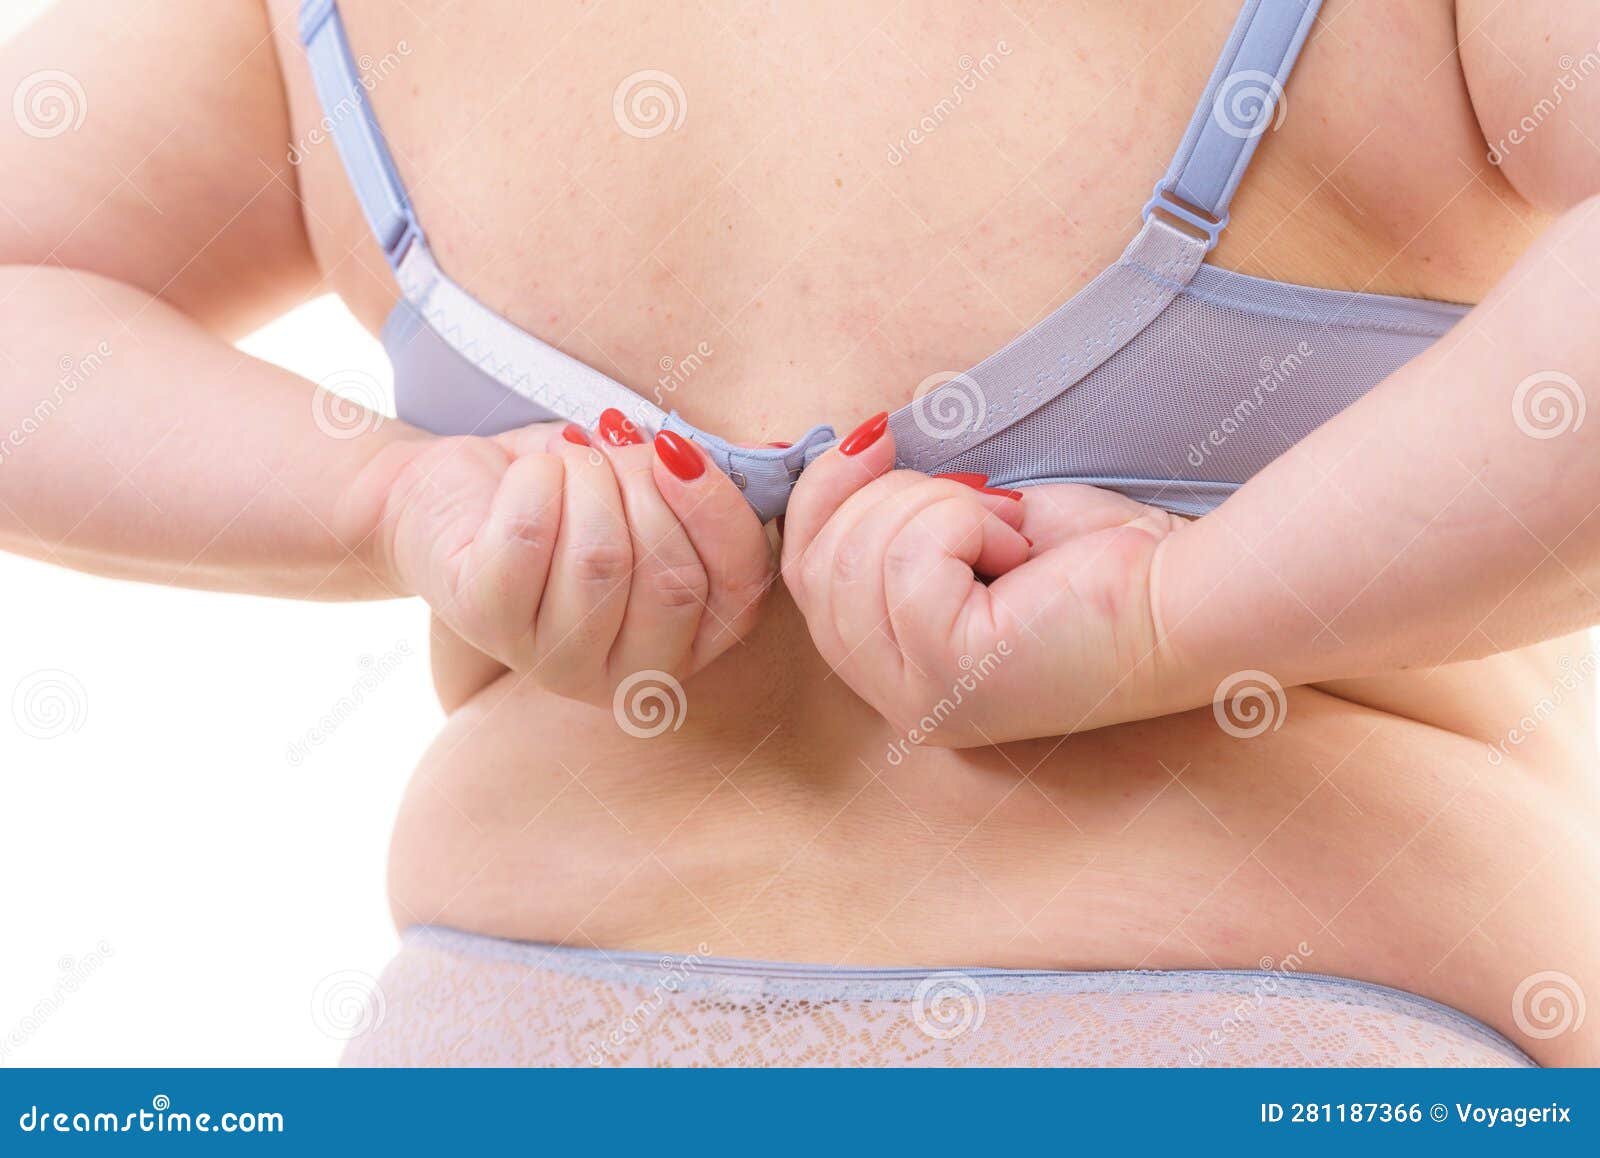 Woman Fastening Green Front Fastening Bra Stock Photo by